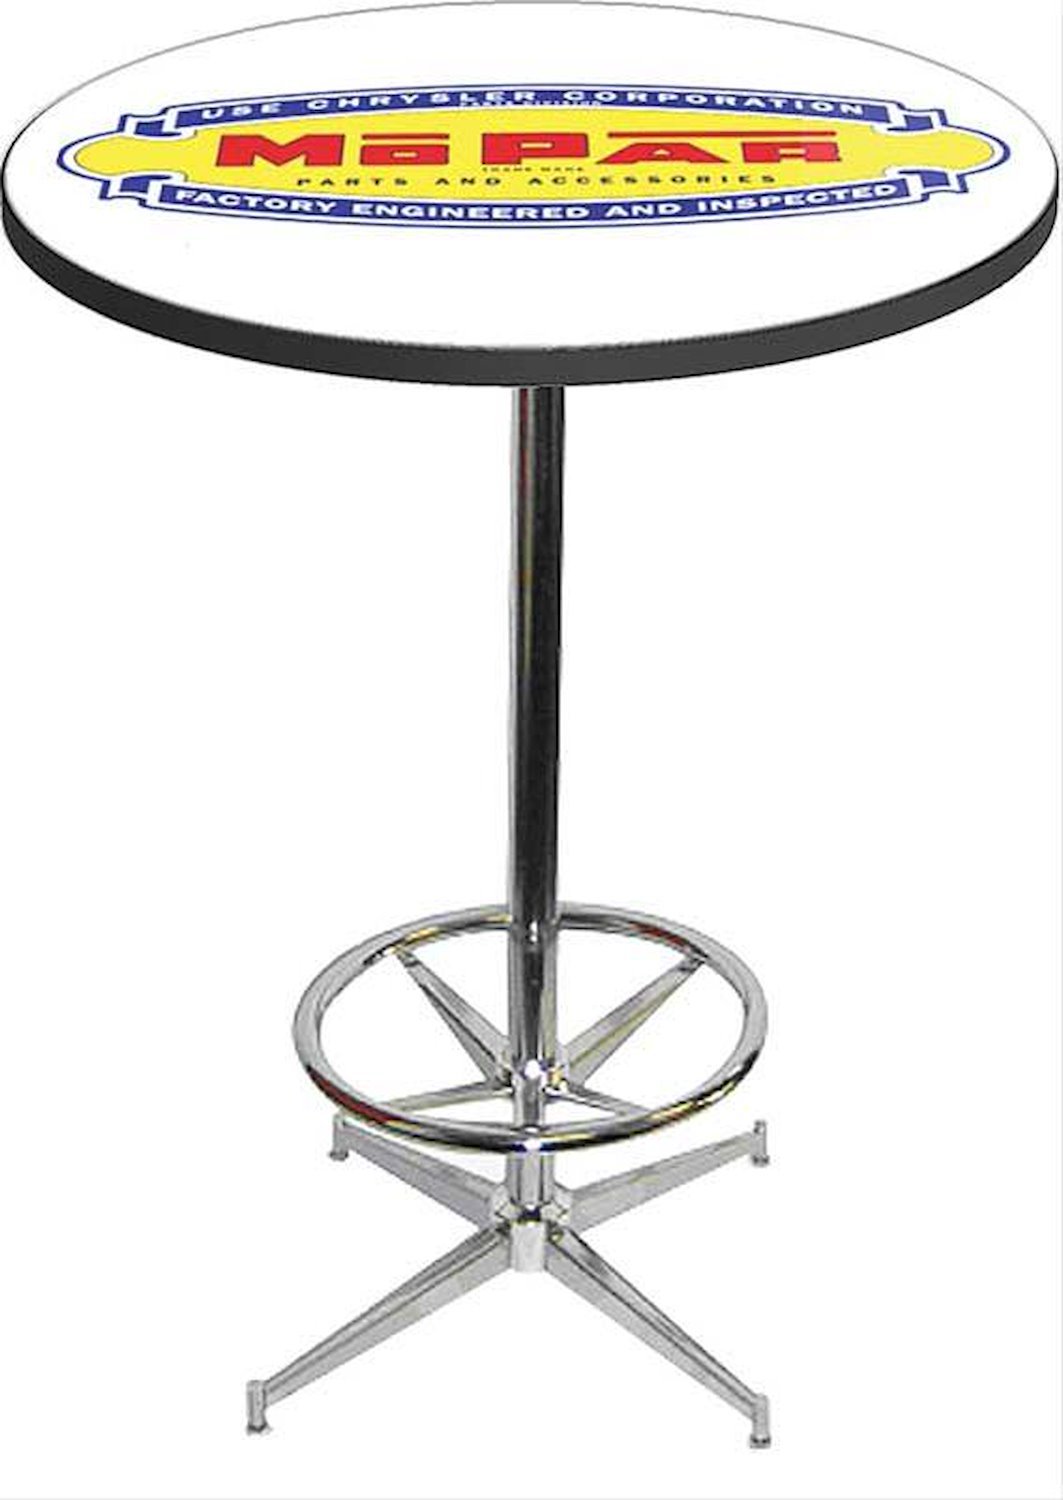 MD673101 Pub Table With Chrome Base And Foot Rest 1948-53 Style Mopar parts And Accessories Logo Pub Table With Chrome Base And